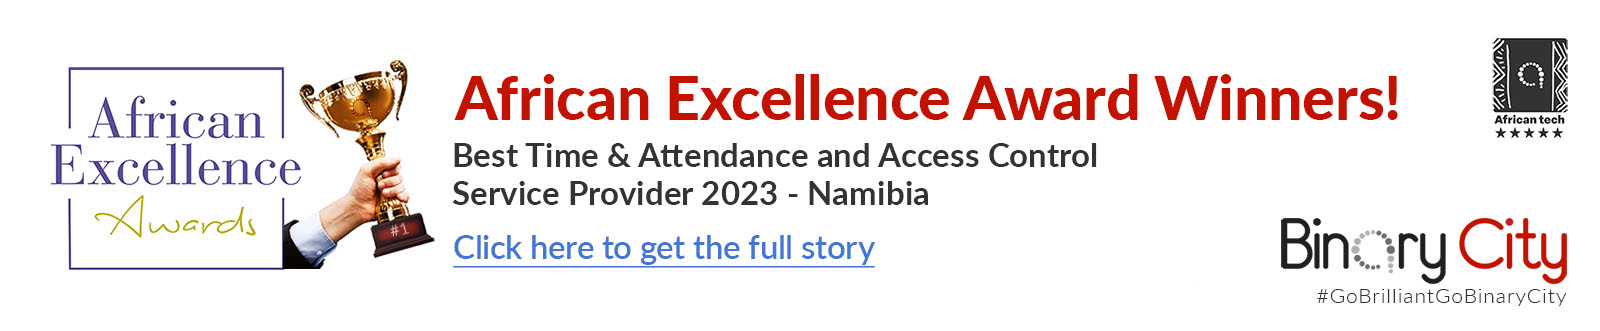 African excellence award winner for best time and attendance and access control